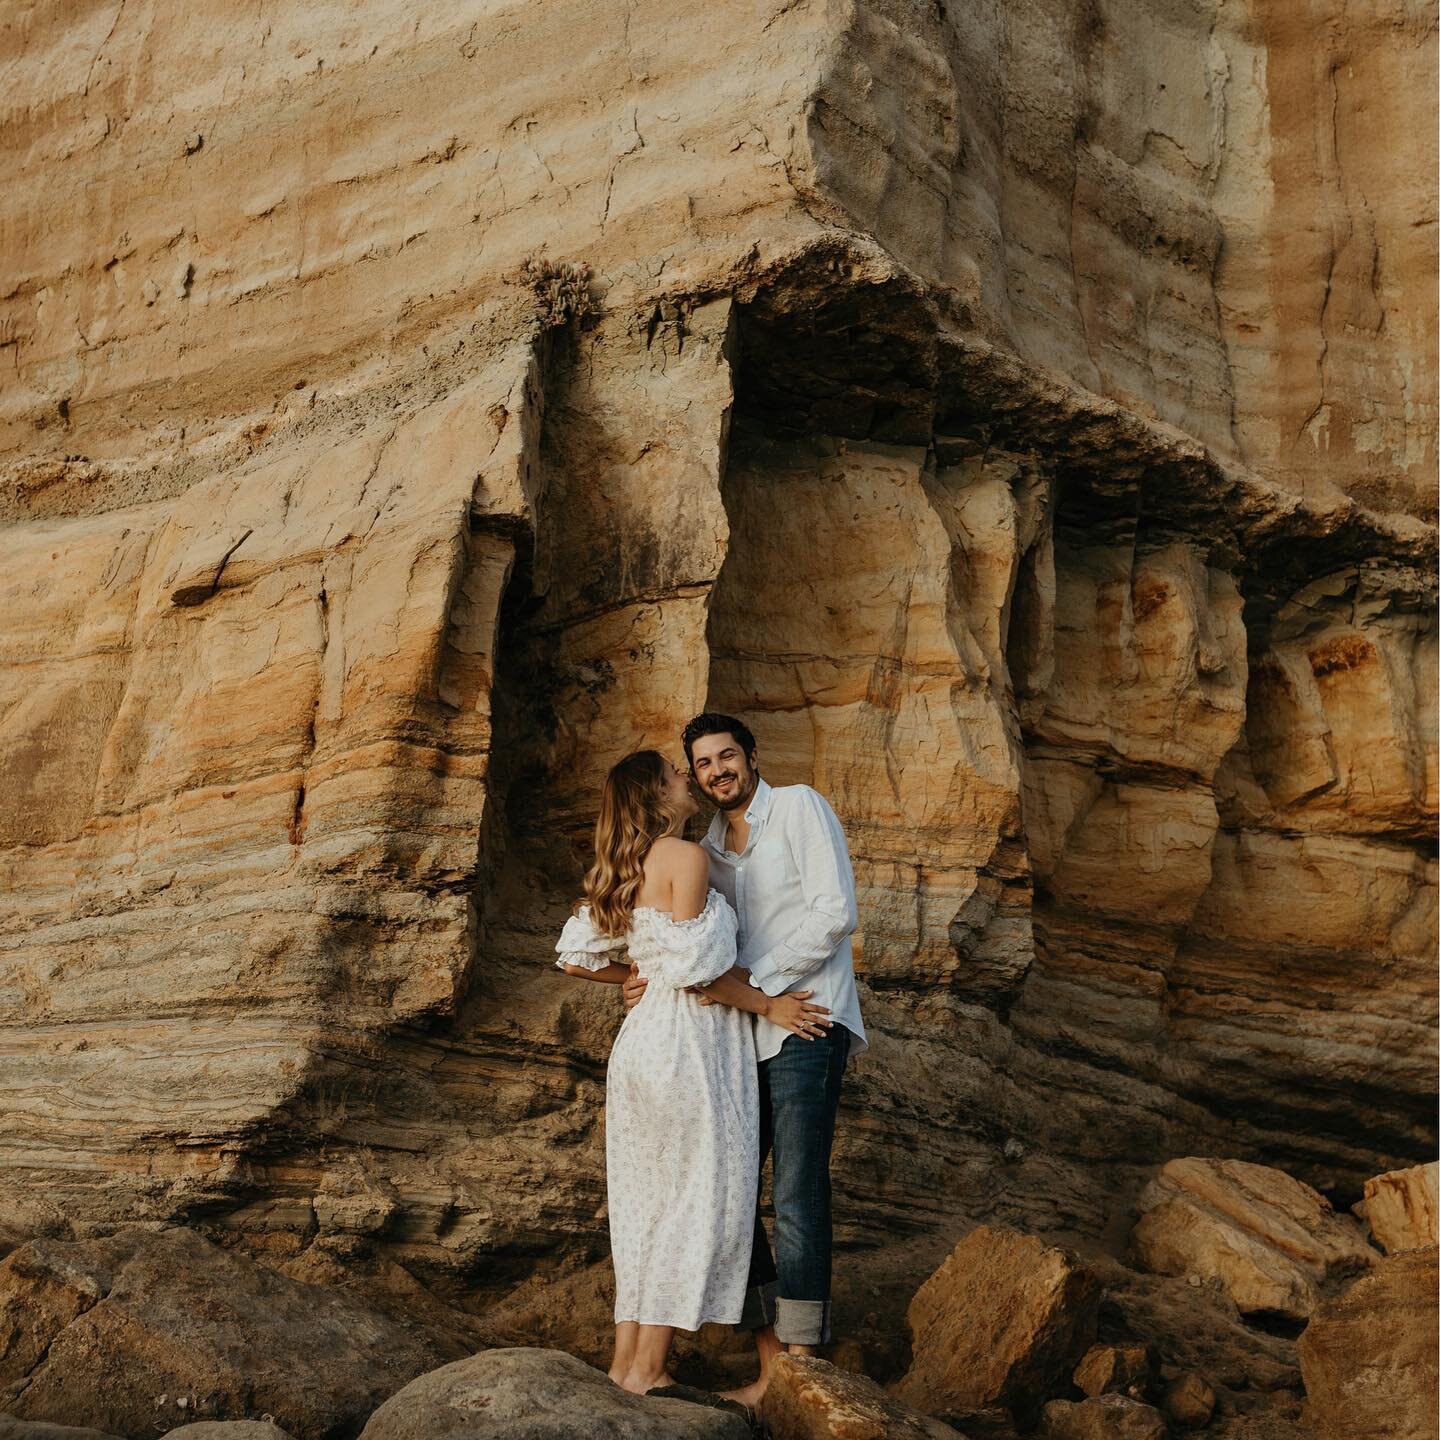 Took these two to one of my favorite beach spots and Mother Nature did not disappoint. Almost got swept away into the ocean at the end but the views were totally worth it 🤍